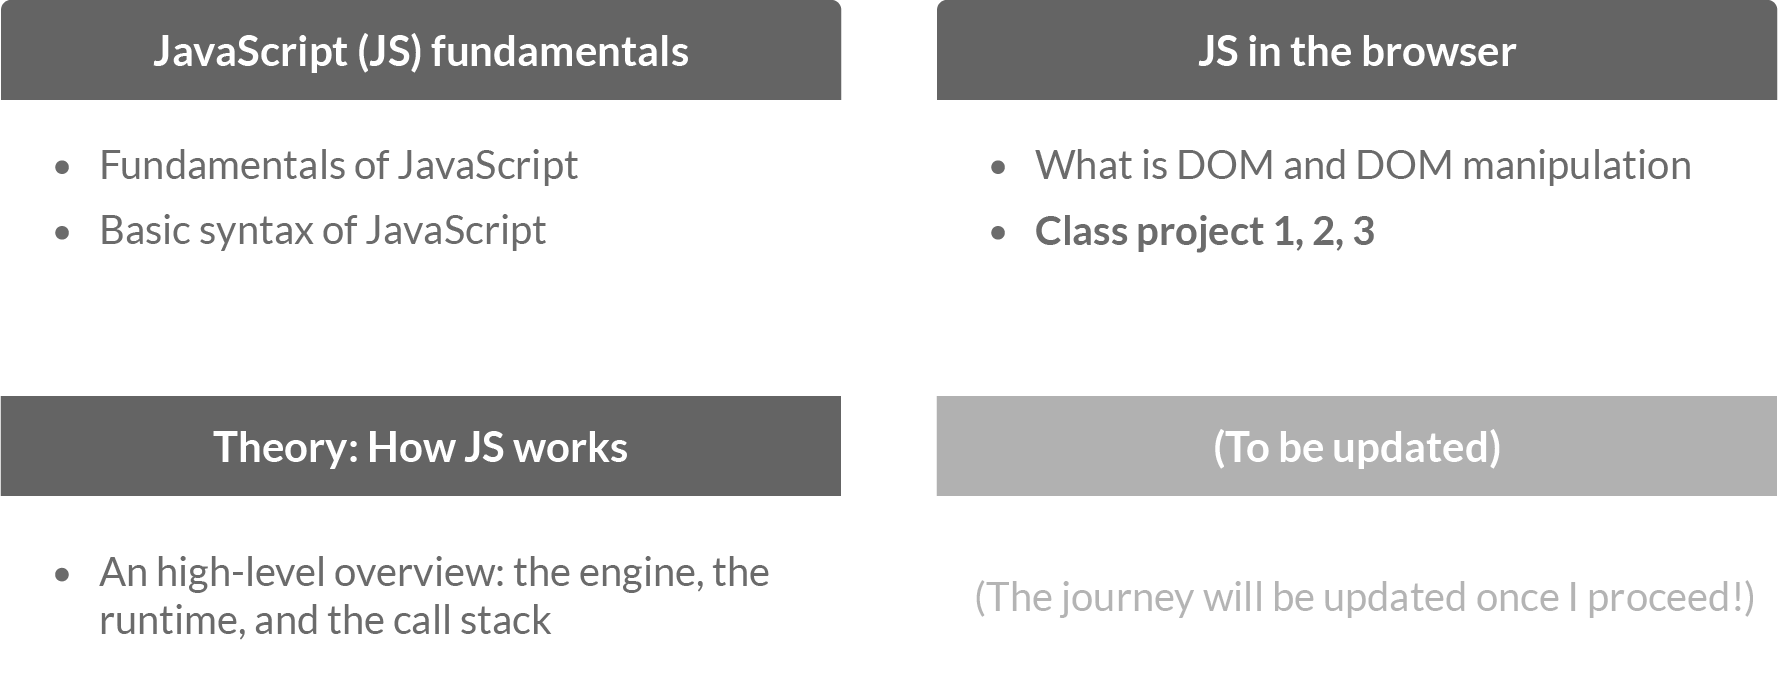 Learning journey map